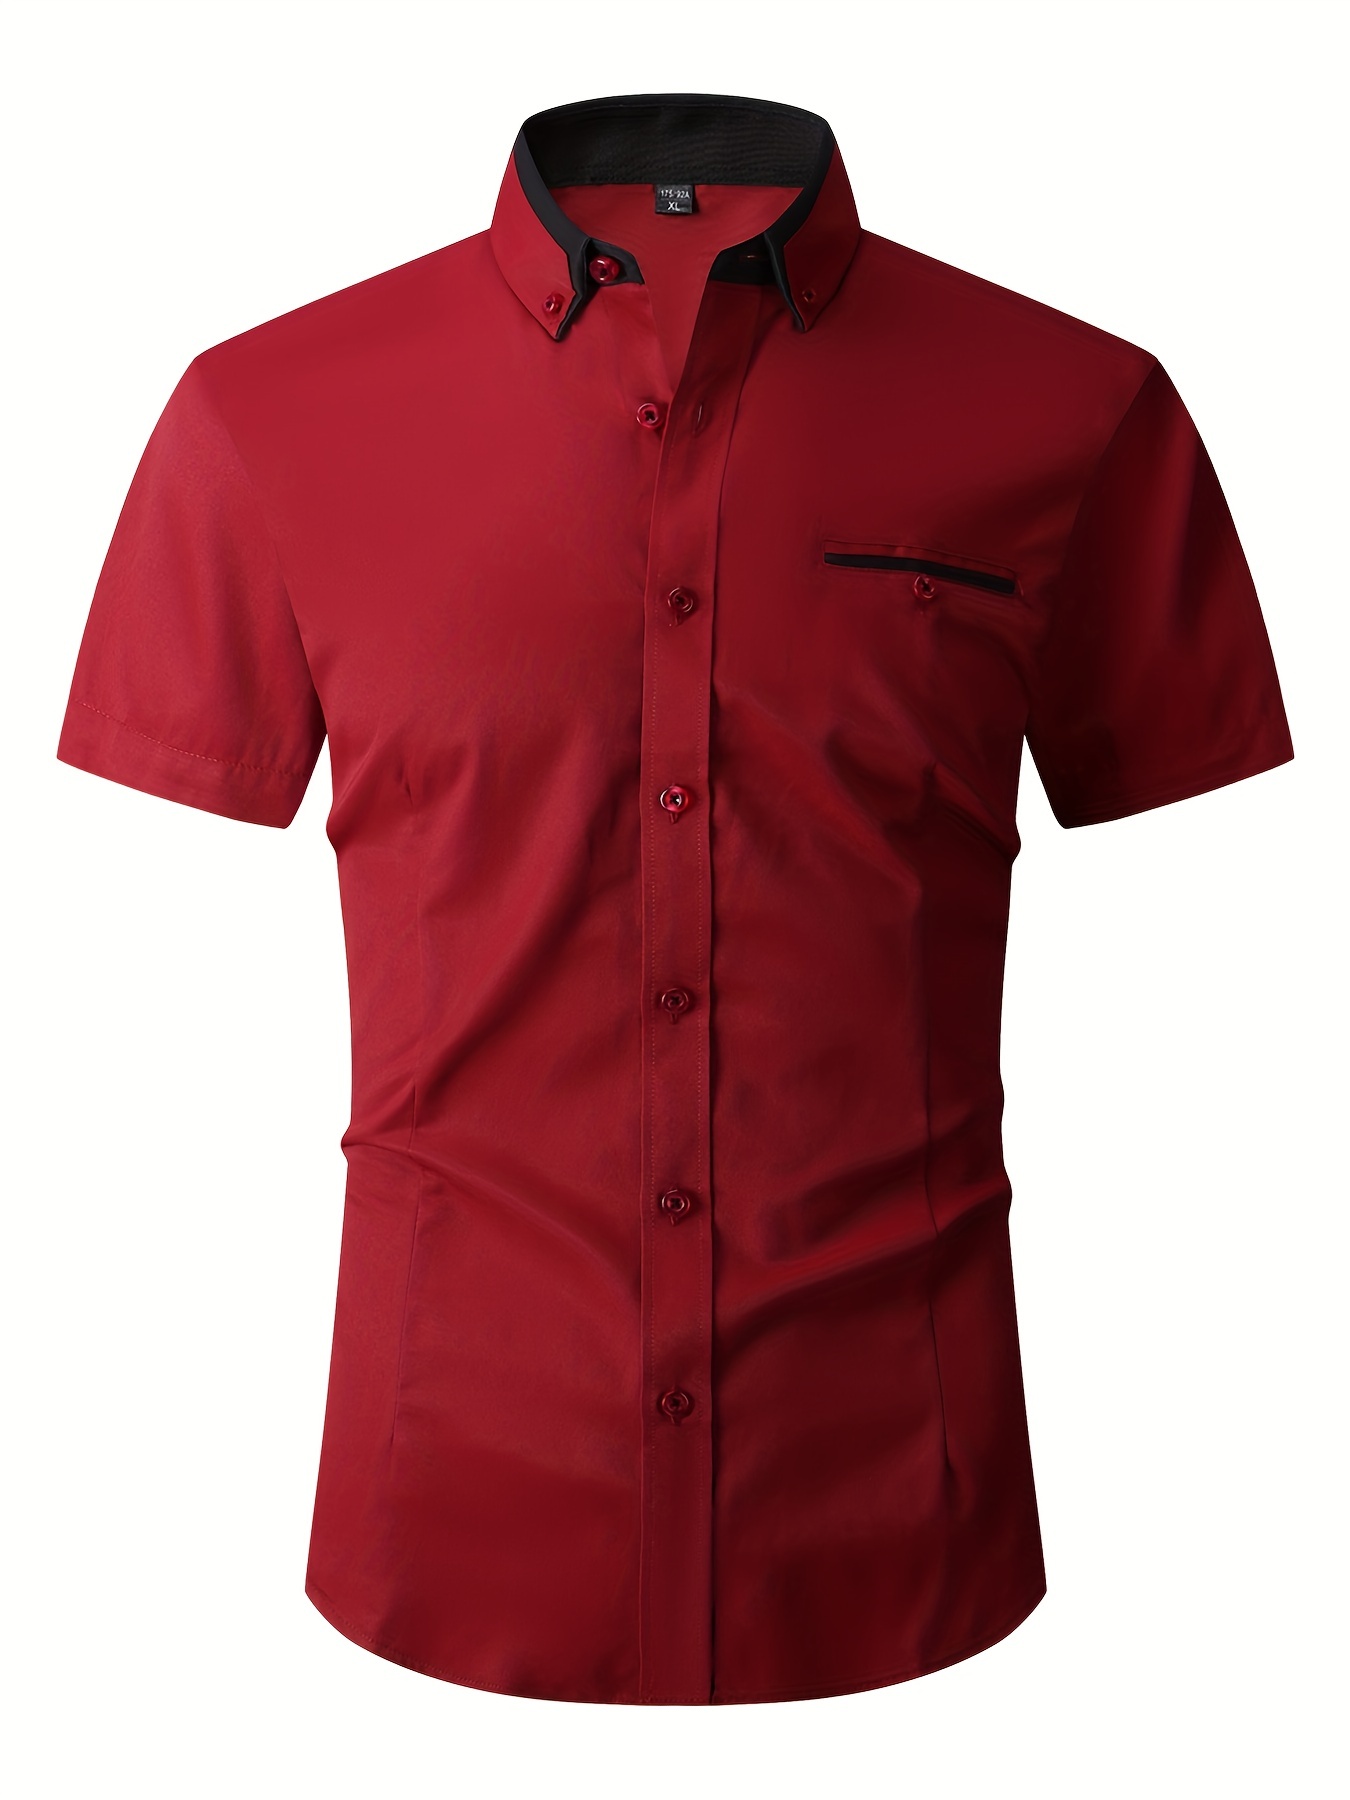 Men's Formal Short Sleeve Button Up Shirt - Classic Design for Summer Business Occasions